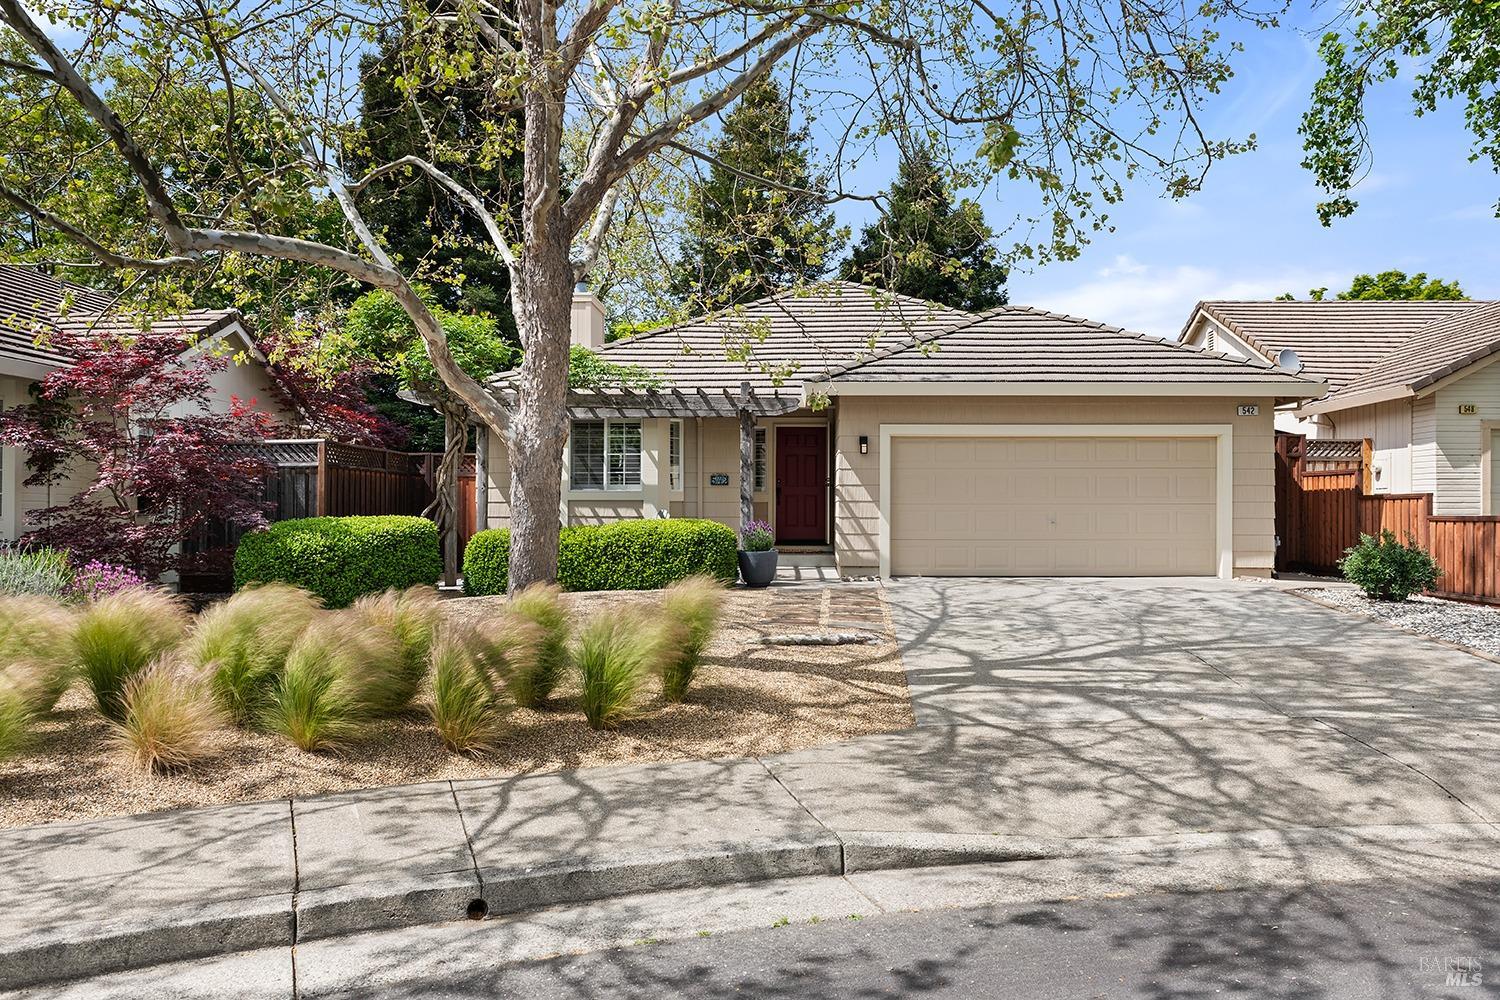 Photo of 542 Cockspur Ct in Windsor, CA